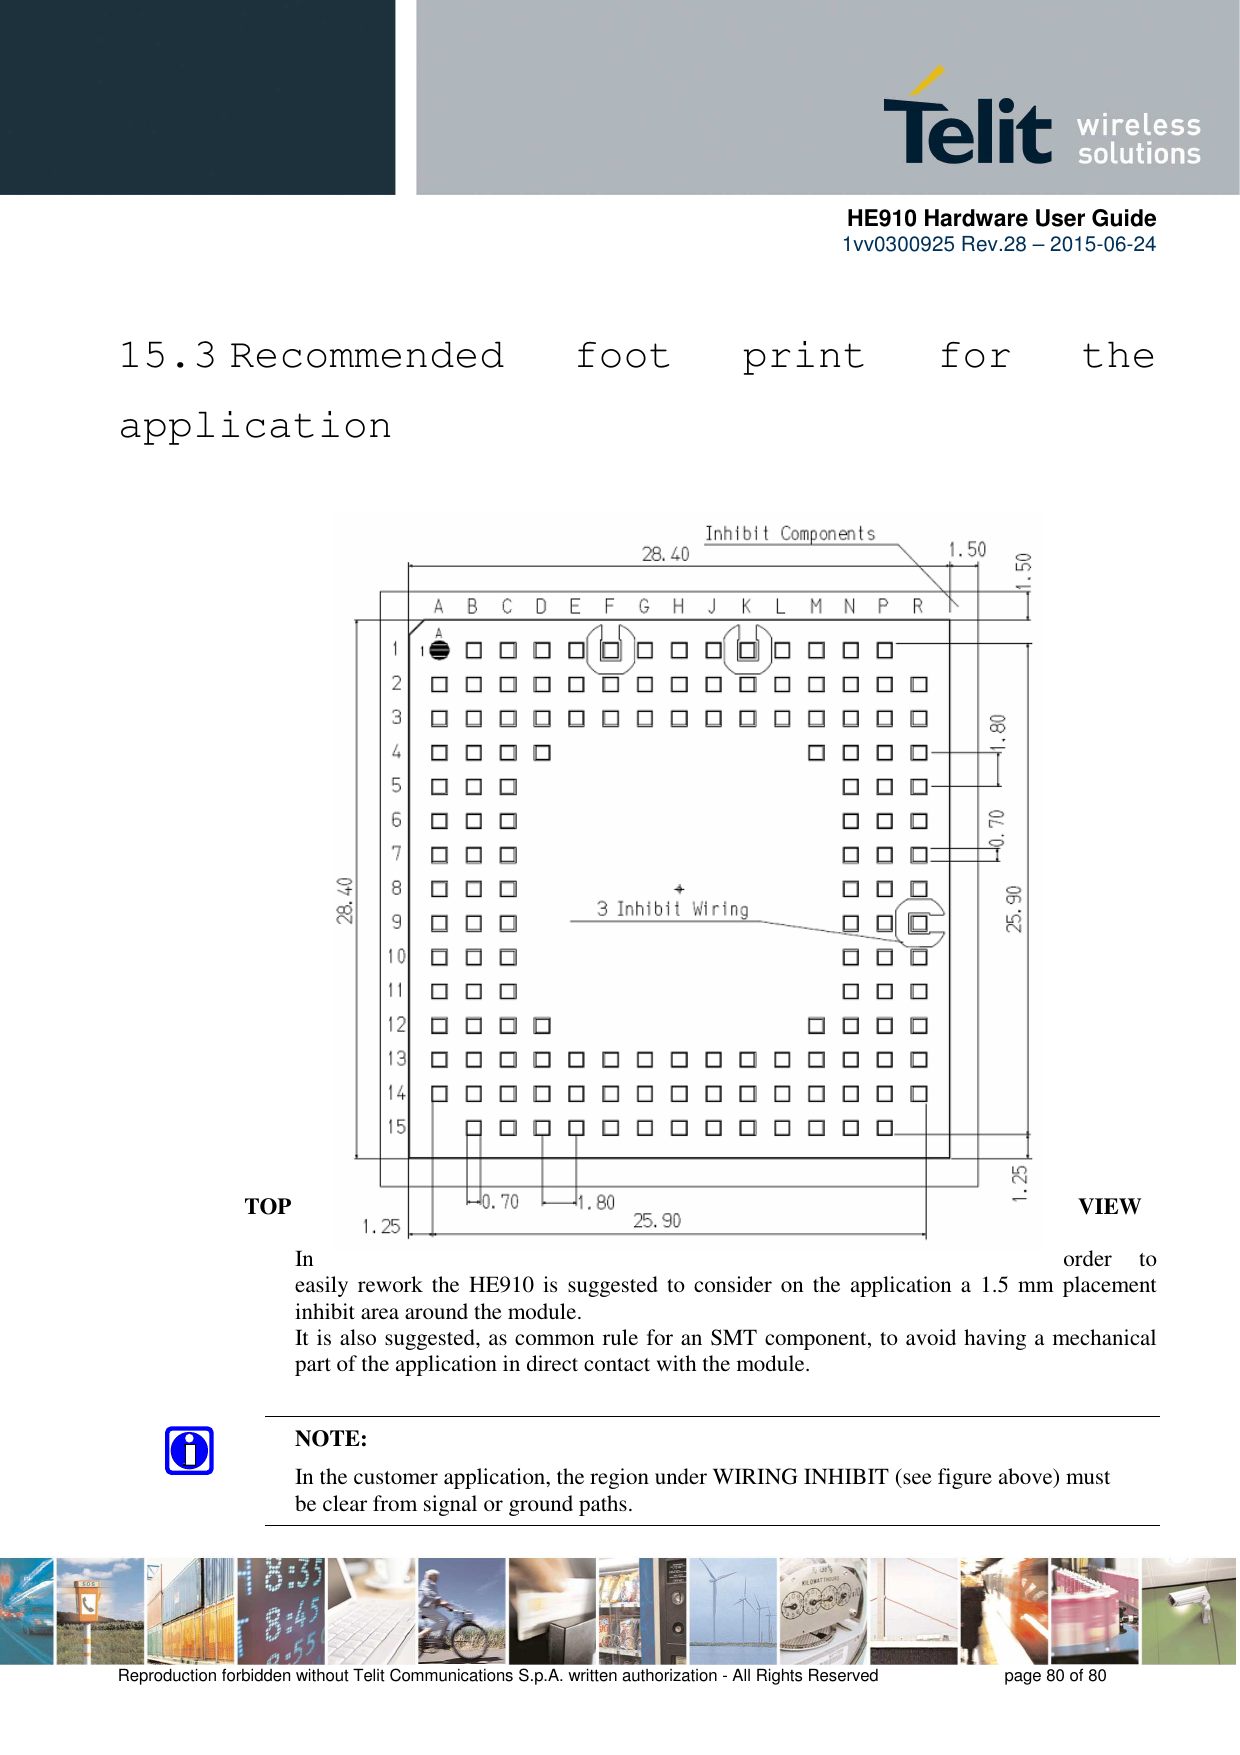      HE910 Hardware User Guide 1vv0300925 Rev.28 – 2015-06-24    Reproduction forbidden without Telit Communications S.p.A. written authorization - All Rights Reserved    page 80 of 80   15.3 Recommended  foot  print  for  the application                          TOP  VIEW  In  order  to easily rework the  HE910  is  suggested to consider on the application a 1.5  mm  placement inhibit area around the module. It is also suggested, as common rule for an SMT component, to avoid having a mechanical part of the application in direct contact with the module.   NOTE:   In the customer application, the region under WIRING INHIBIT (see figure above) must   be clear from signal or ground paths.  